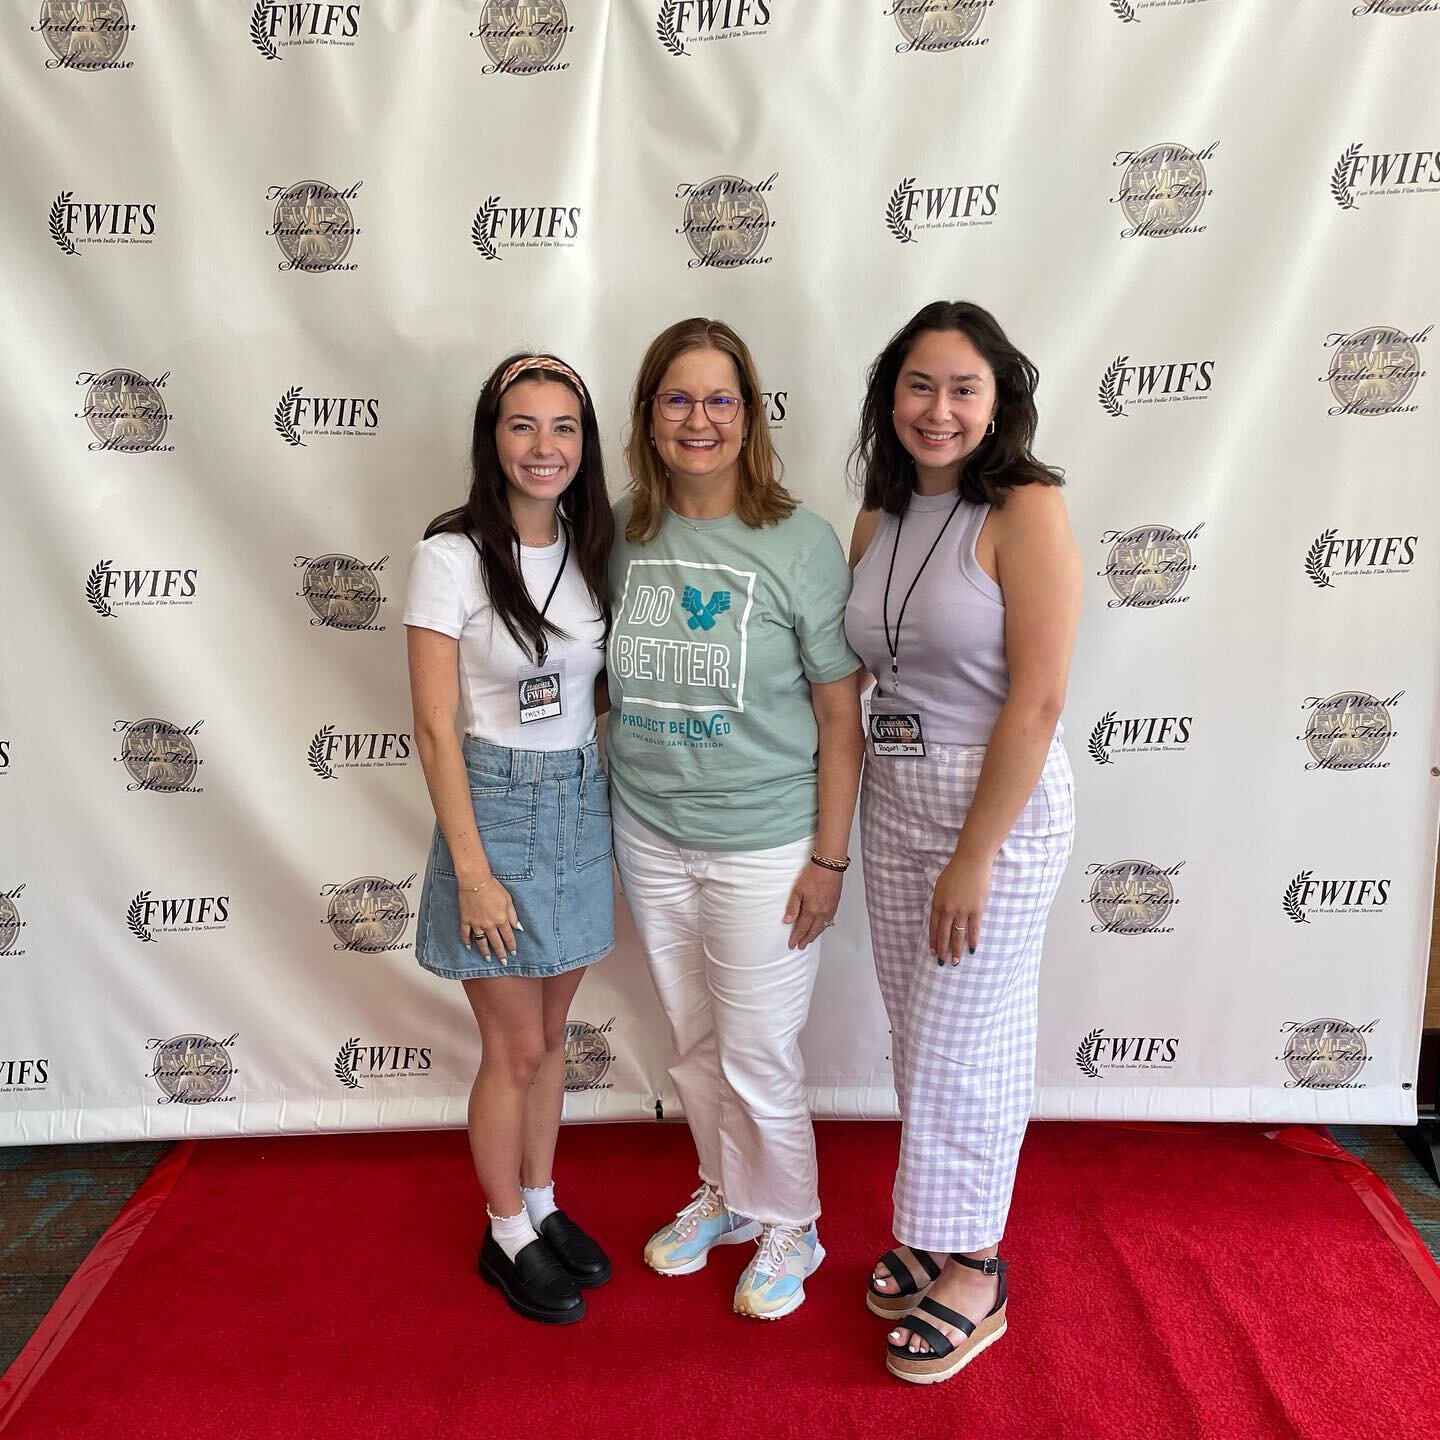 Red carpet moment for Beloved, documentary 🎥 film produced by students at TCU. The film was screened today at Fort Worth Indie Film Showcase and is nominated for Best Documentary, short and Best Student, short. Thank you to all who came to watch and